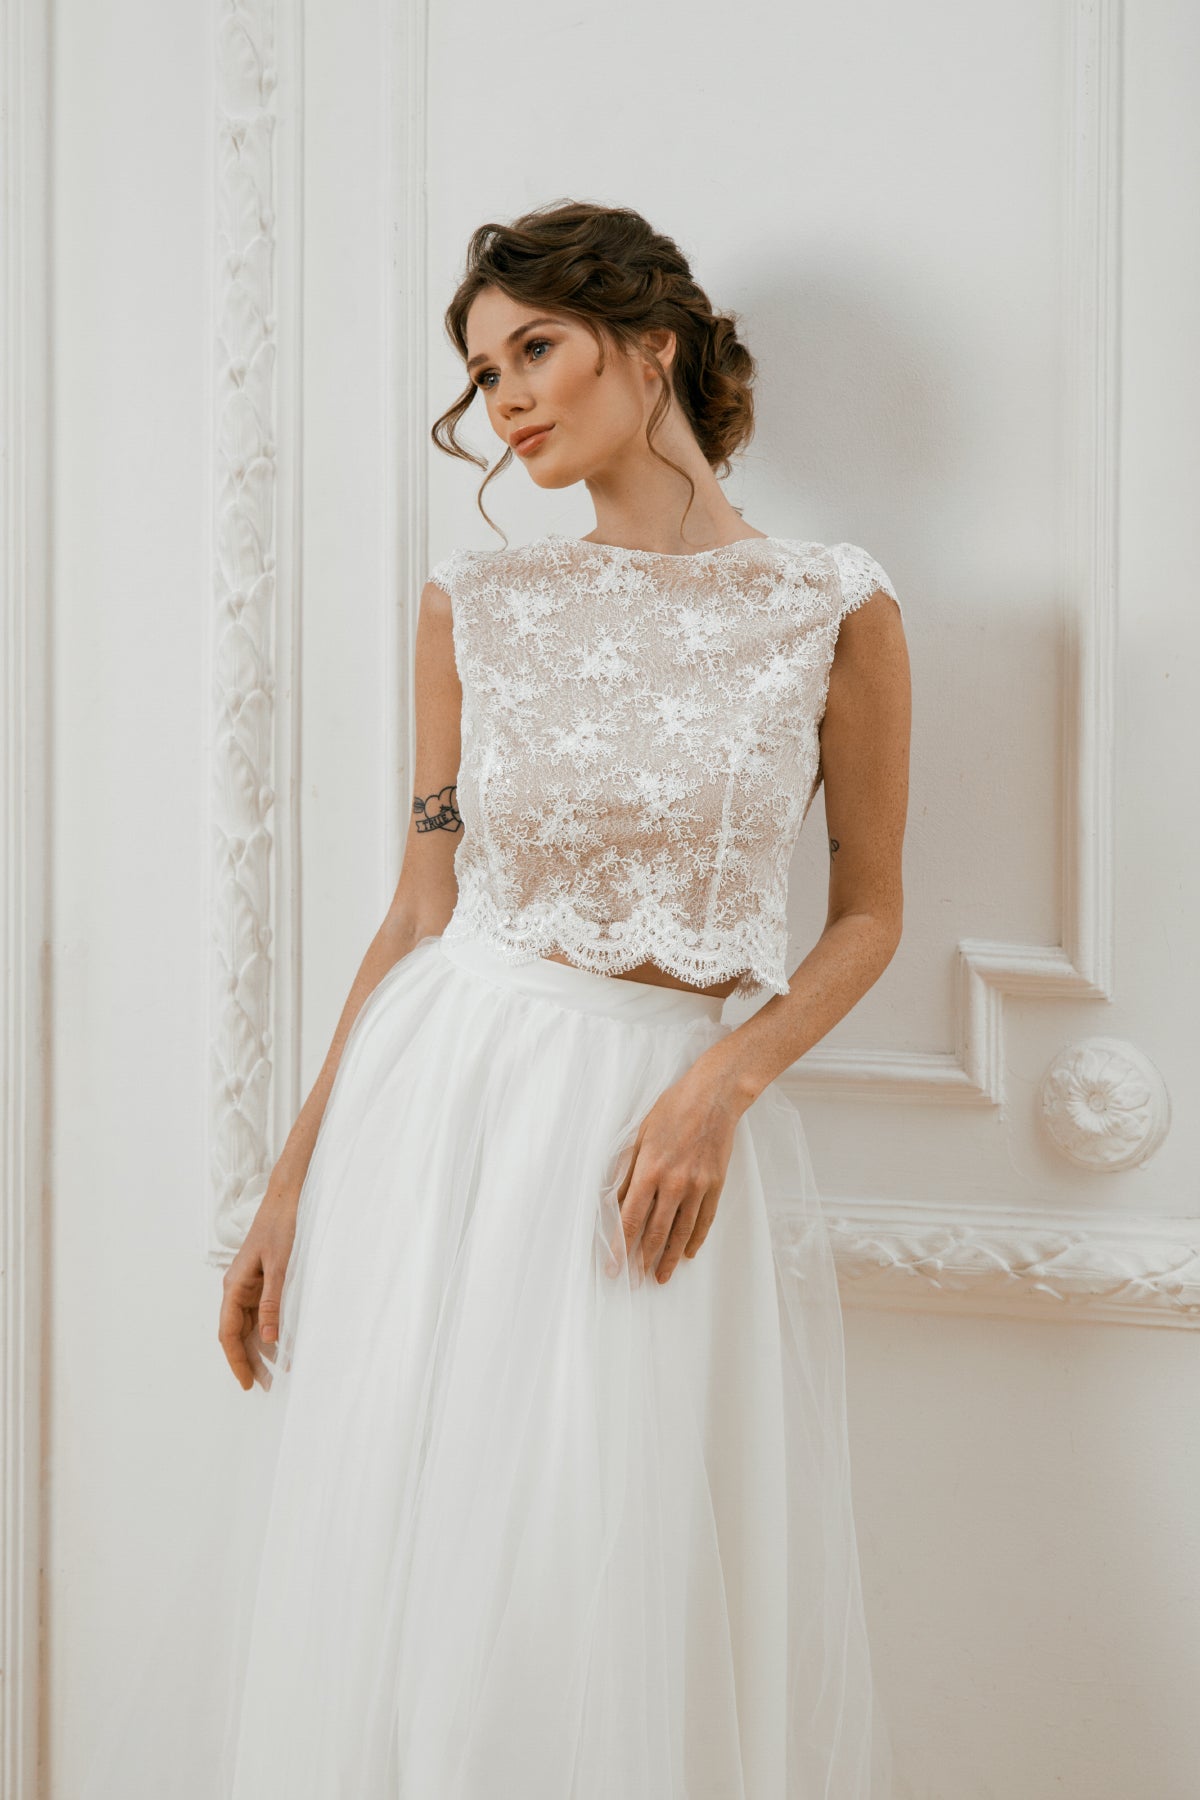 Lace crop top wedding dress • two piece bridal gown • alternative party dress